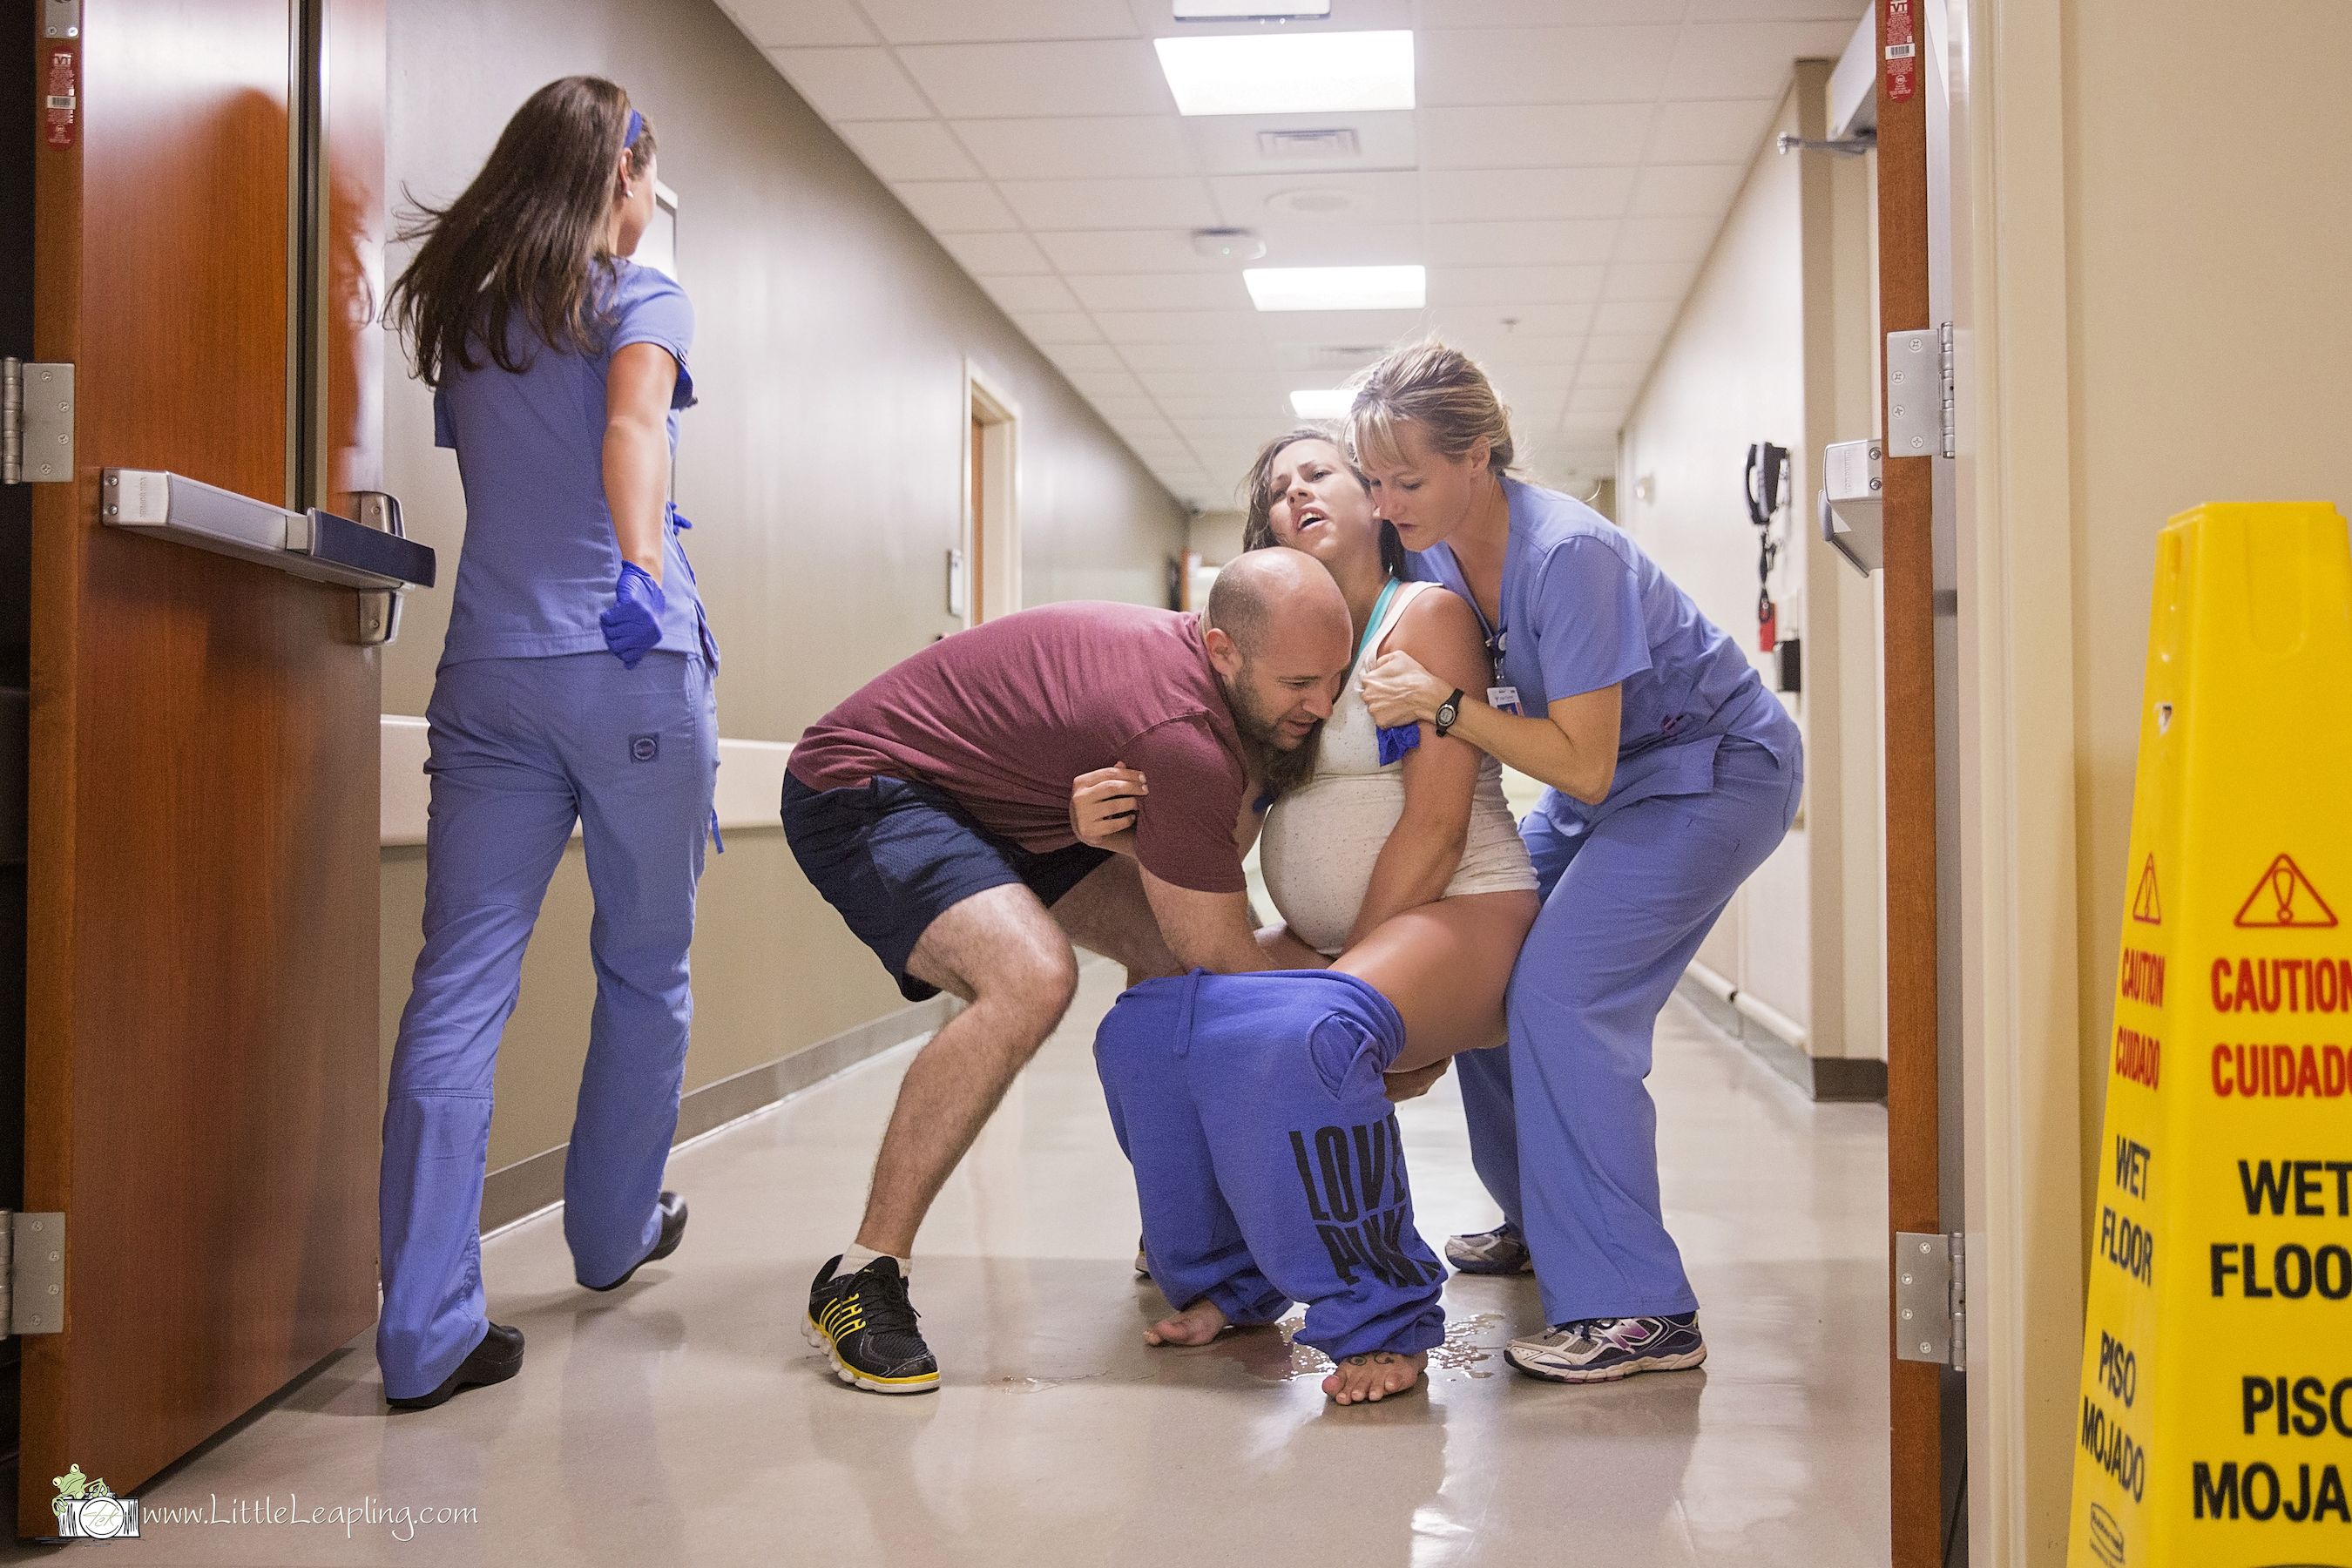 This Woman Gave Birth on the Hospital Floor and Her Photographer Caught it All on Camera NSFW